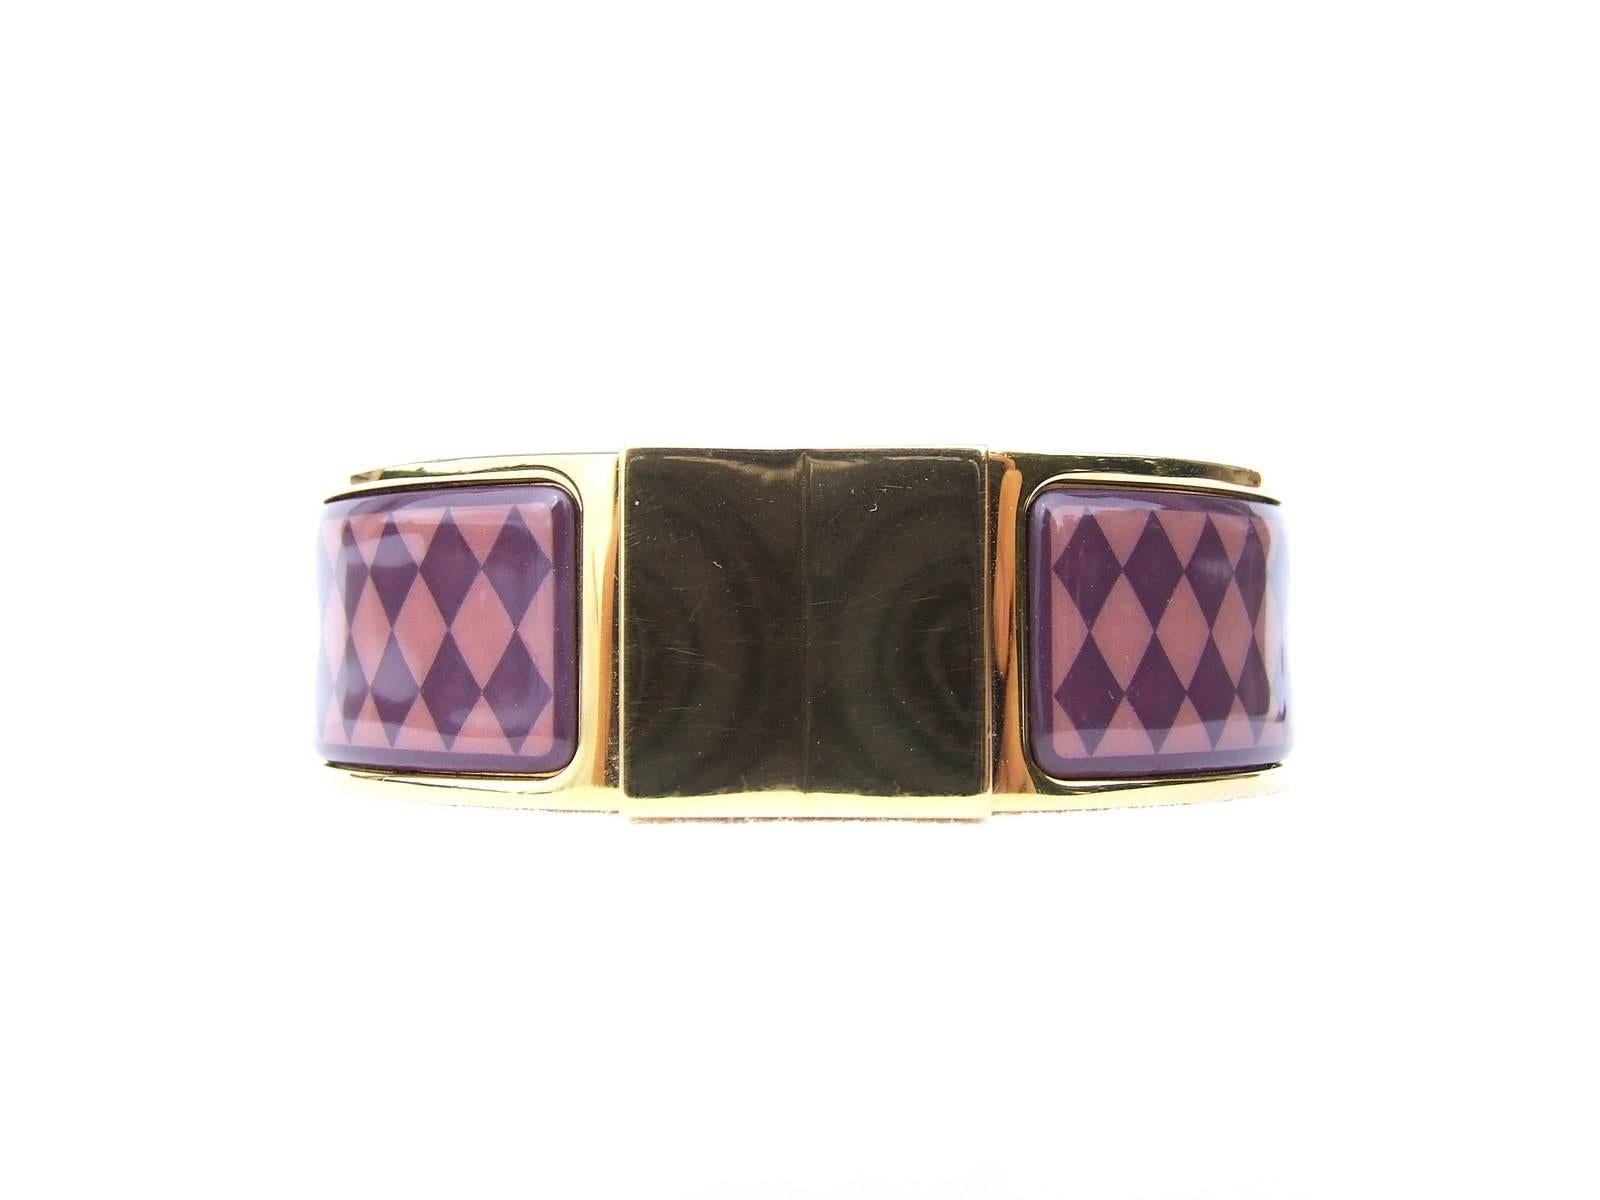 Gorgeous Authentic Hermes Bracelet

"Clic Clac" version

Stamp D

Made of Enamel Printed and Gold plated Hardware

Pattern: diamond-shaped

Colorways: Old Pink and Purple

"HERMES" and gold plated symbol engraved inside

Size: